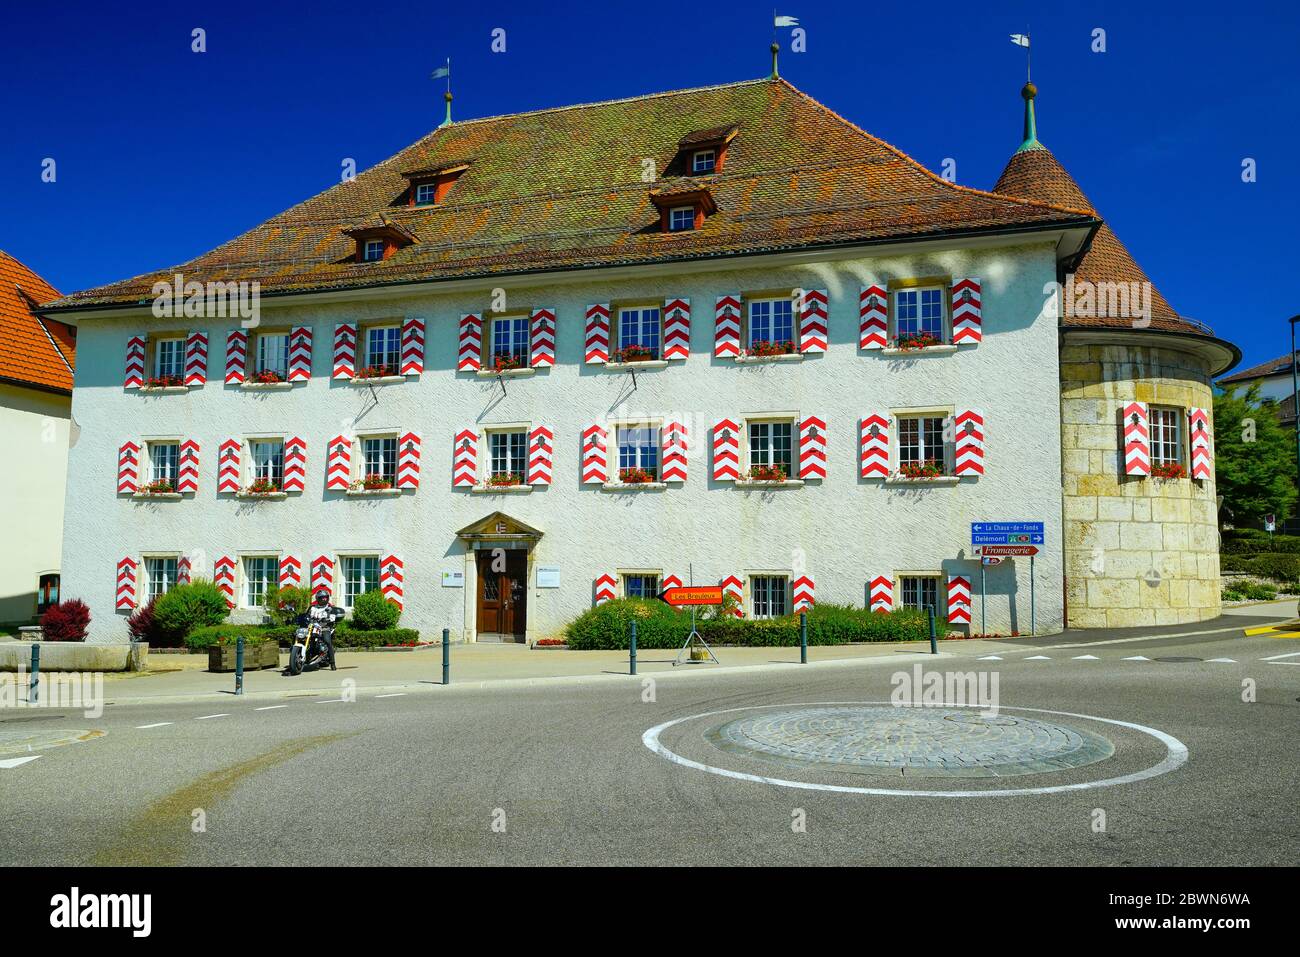 Castle in Saignelégier. Saignelégier is a municipality in the canton of Jura. Canton Jura in Switzerland. Great bishop of Autun, had given this villag Stock Photo